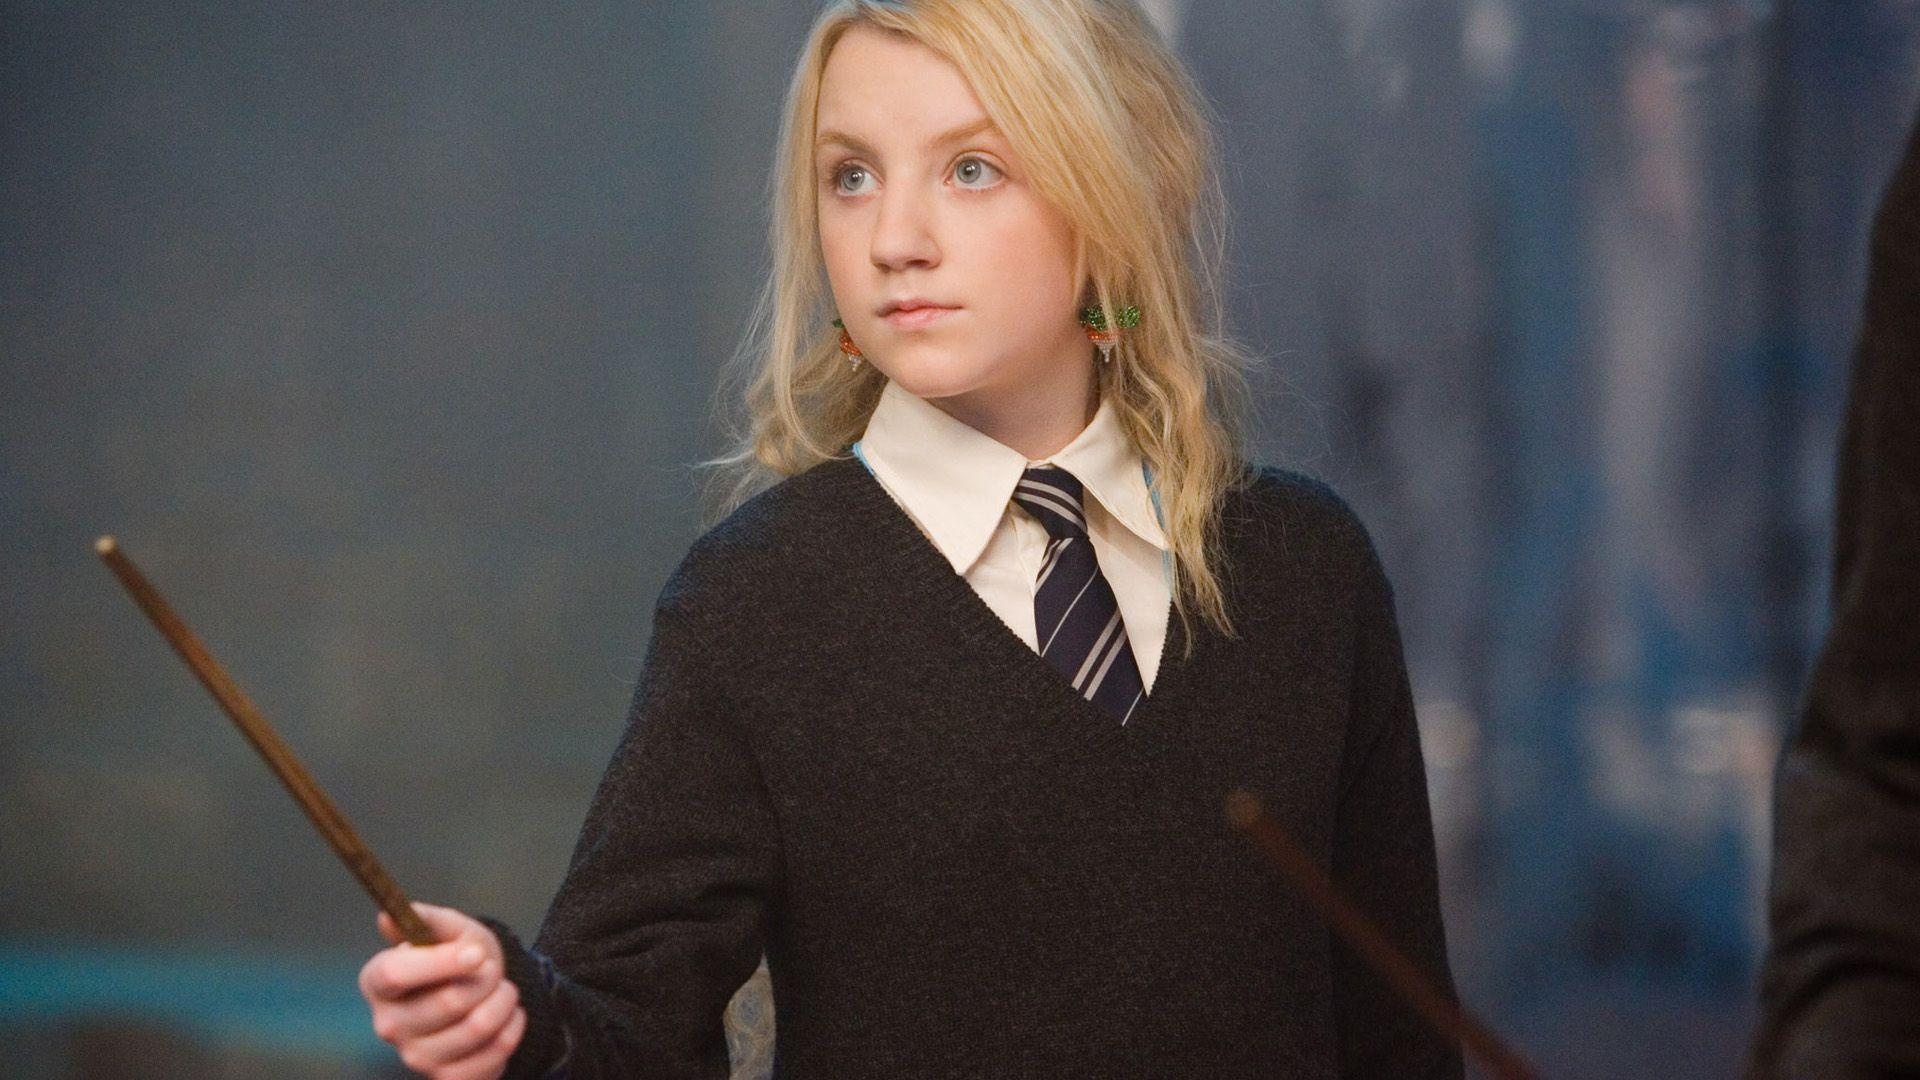 Luna Lovegood: The only child of Xenophilius and Pandora Lovegood. 1920x1080 Full HD Wallpaper.